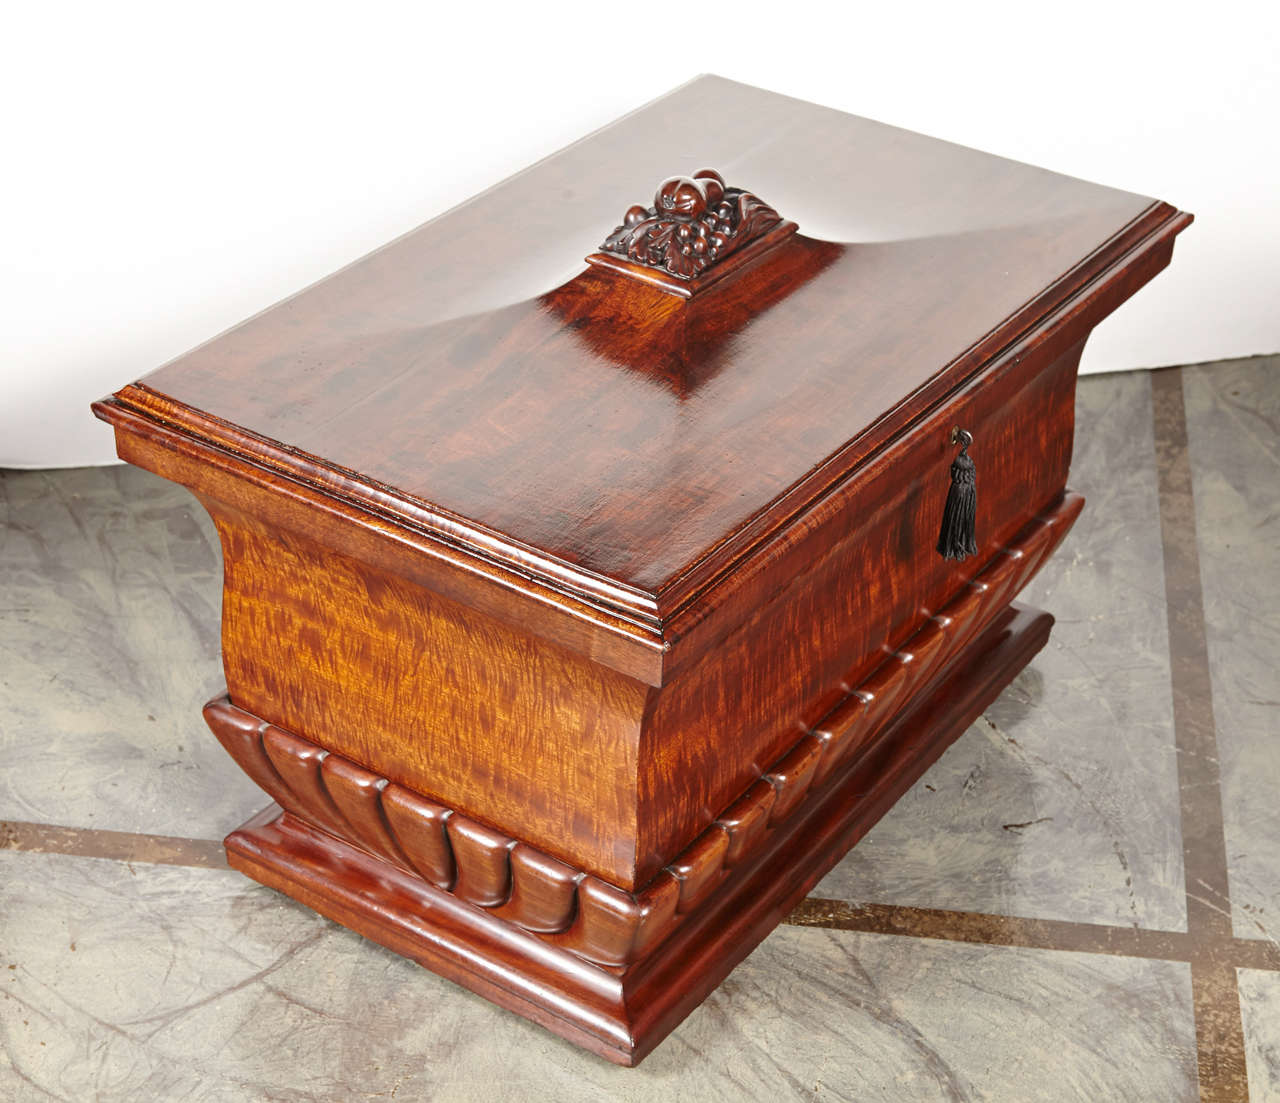 19th century Regency wine cooler. Beautiful carved mahogany with a lead liner.